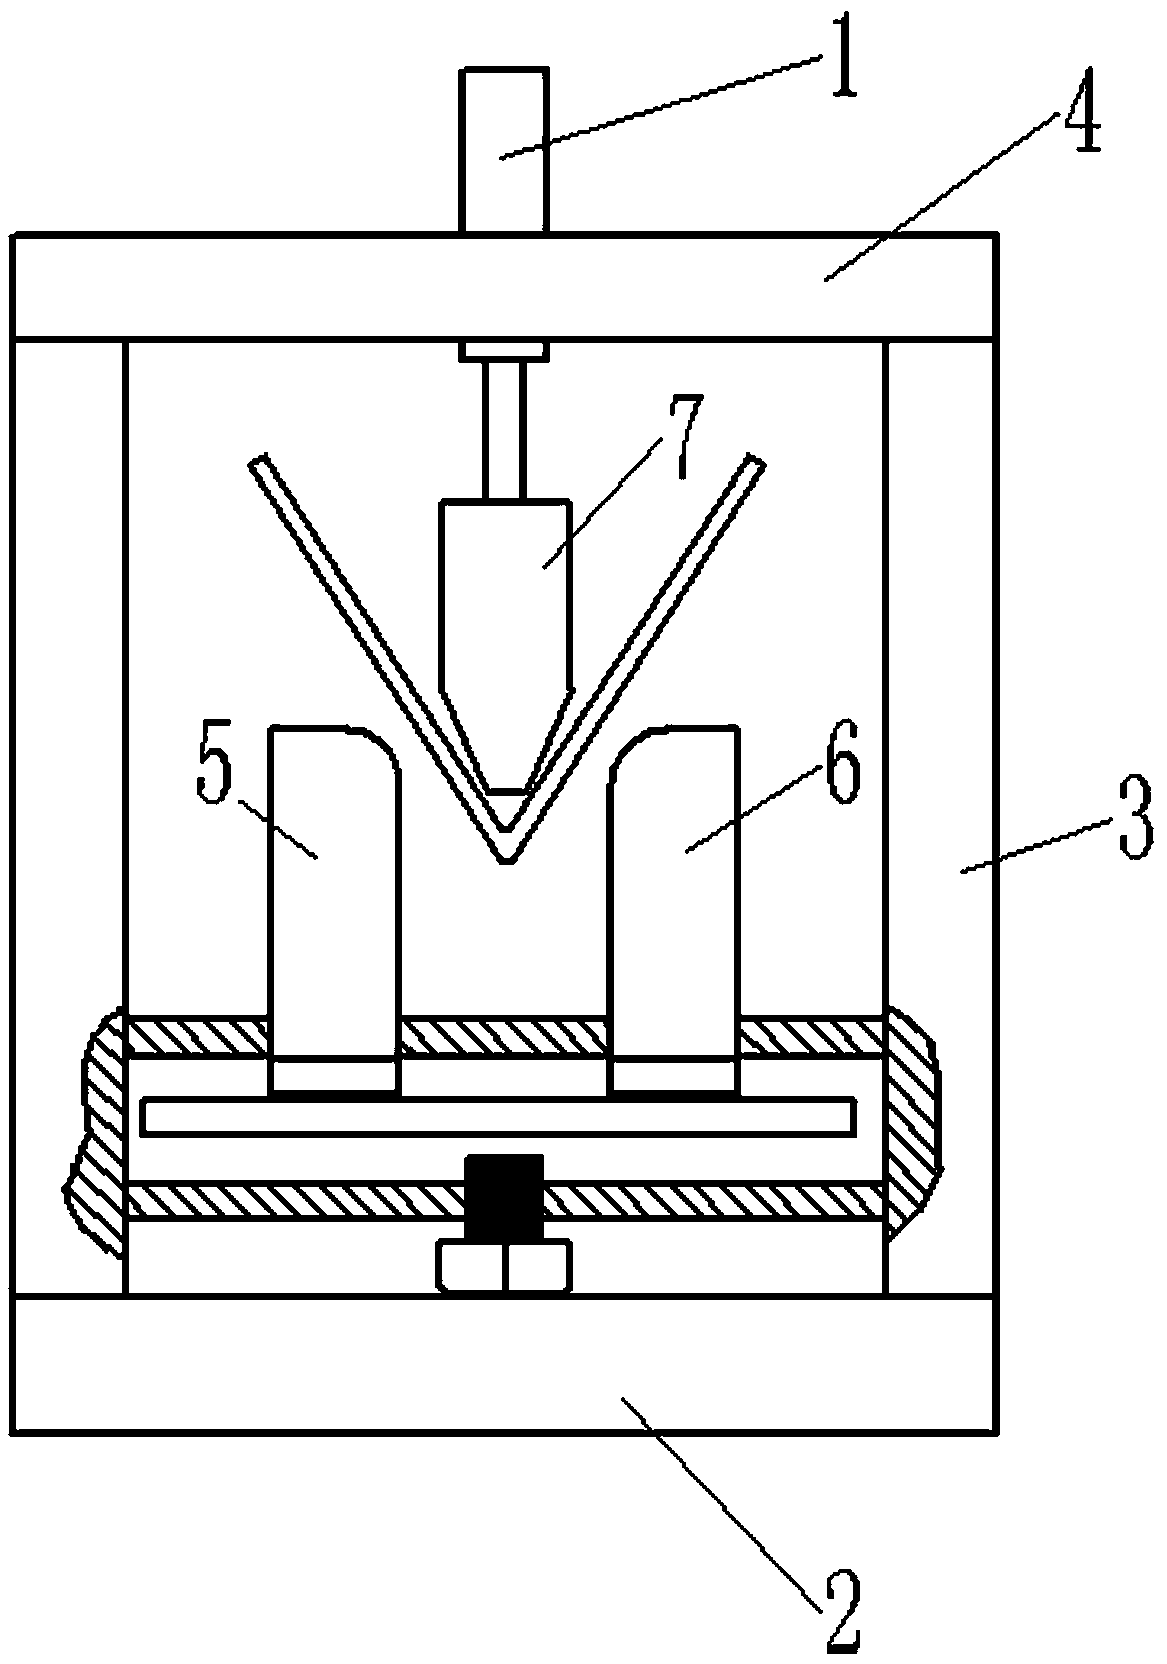 Bending testing device for cold-bending plate